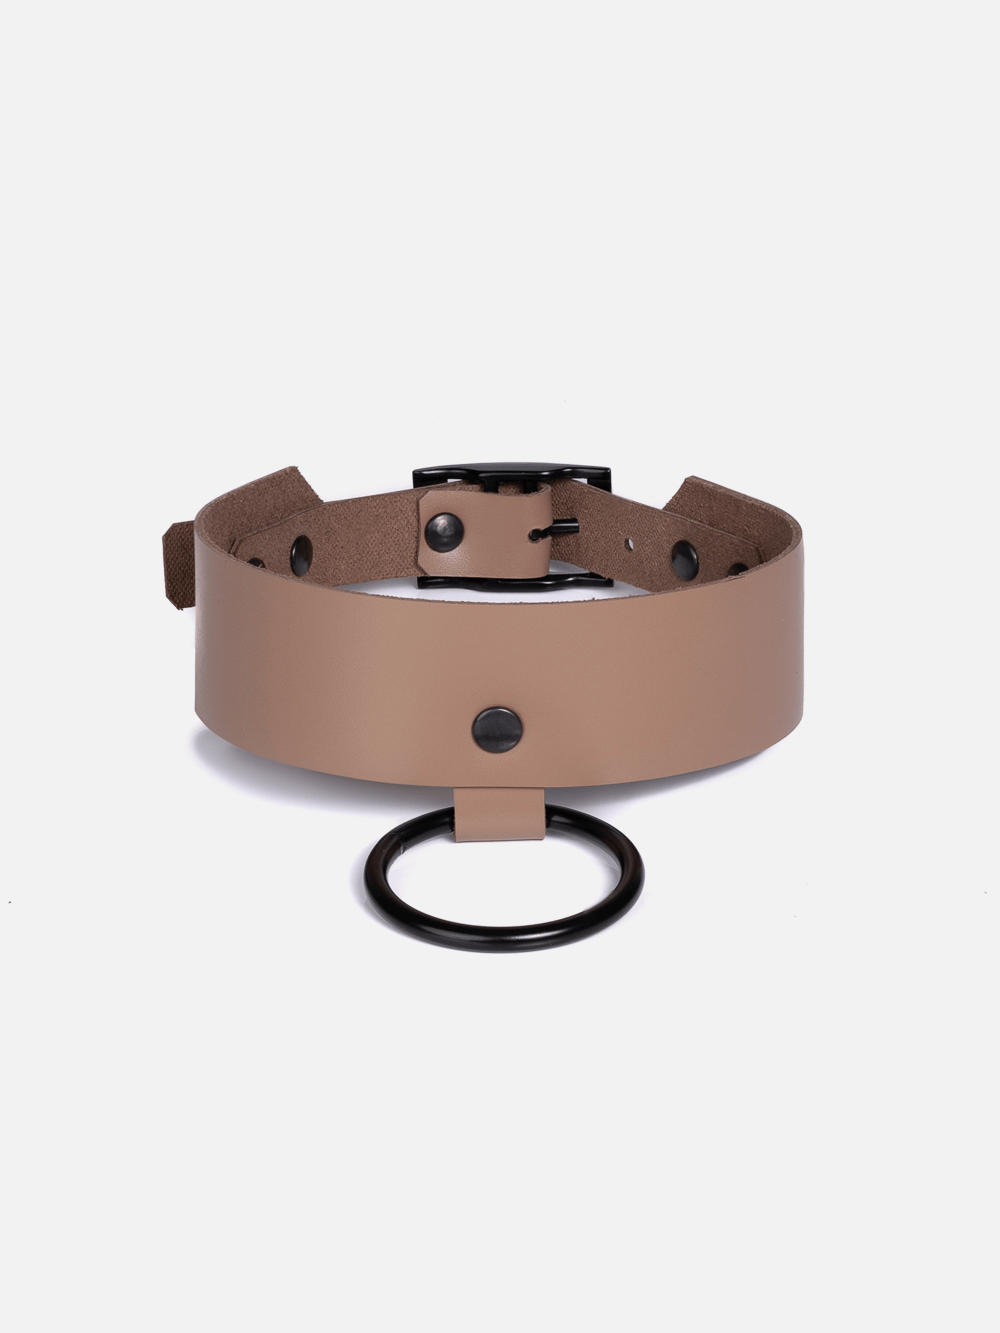 Cherry wide choker necklace made of beige genuine leather and black metal ring.